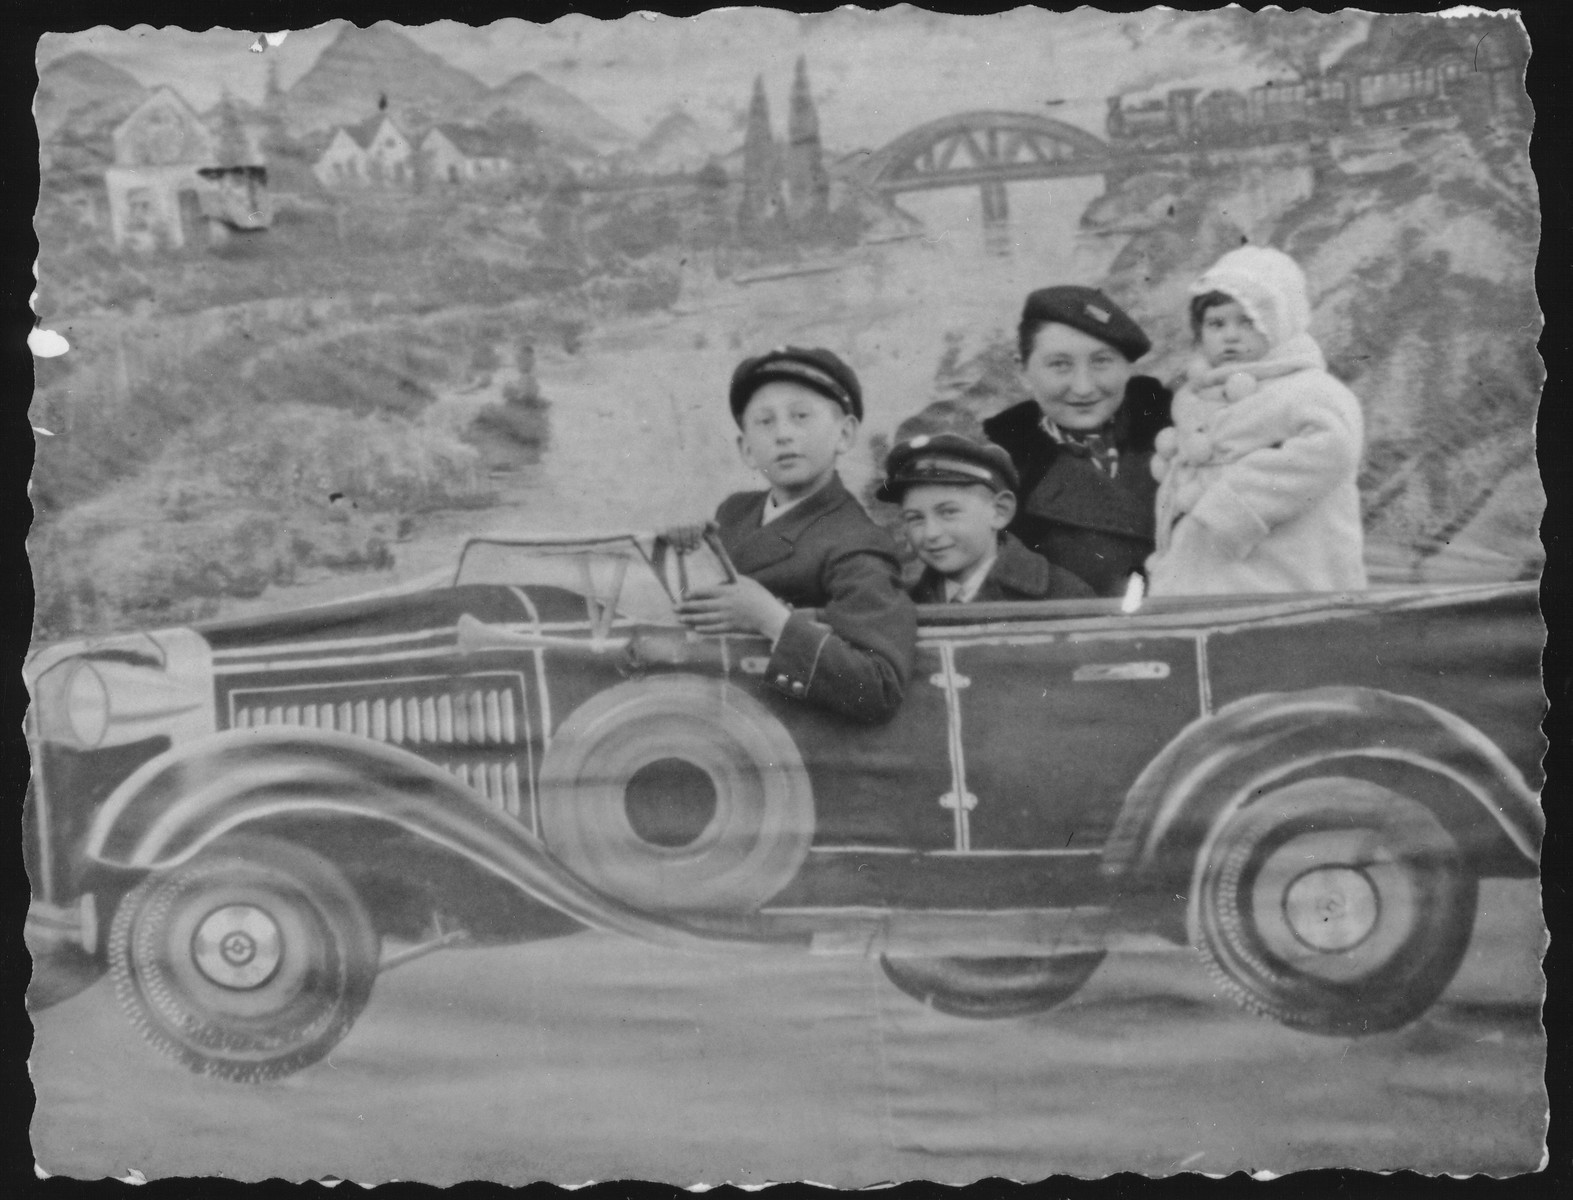 Zipporah (Katz) Sonenson poses with her younger brother and her two children against a backdrop of a sports car in the photo studio owned by her parents, Yitzhak and Alte Katz in Eisiskes.

Pictured from left to right are: Avigdor Katz, Yitzhak Uri Sonenson, Zipporah (Katz) Sonenson and Yaffa Sonenson.  After the paving of the Pilsudski Highway, to own or ride in a car became the aspiration of the younger generation in Eisiskes.  In the 1930s the sports car was the most popular backdrop in the Katz photography studio.  Avigdor Katz was killed by the Germans during the September 1941 mass shooting action in Eisiskes.